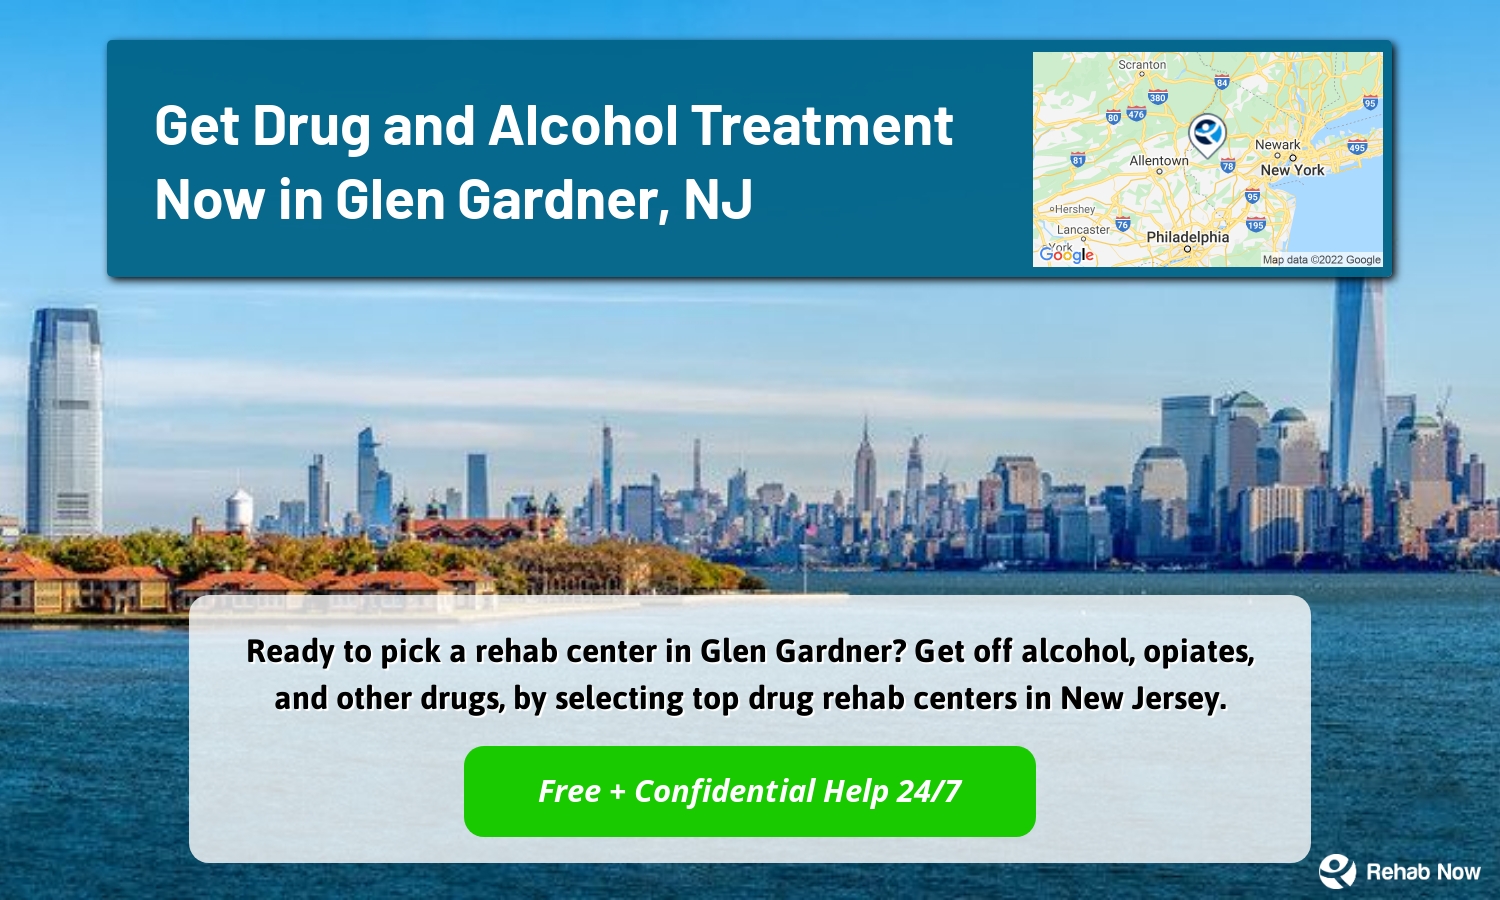 Ready to pick a rehab center in Glen Gardner? Get off alcohol, opiates, and other drugs, by selecting top drug rehab centers in New Jersey.